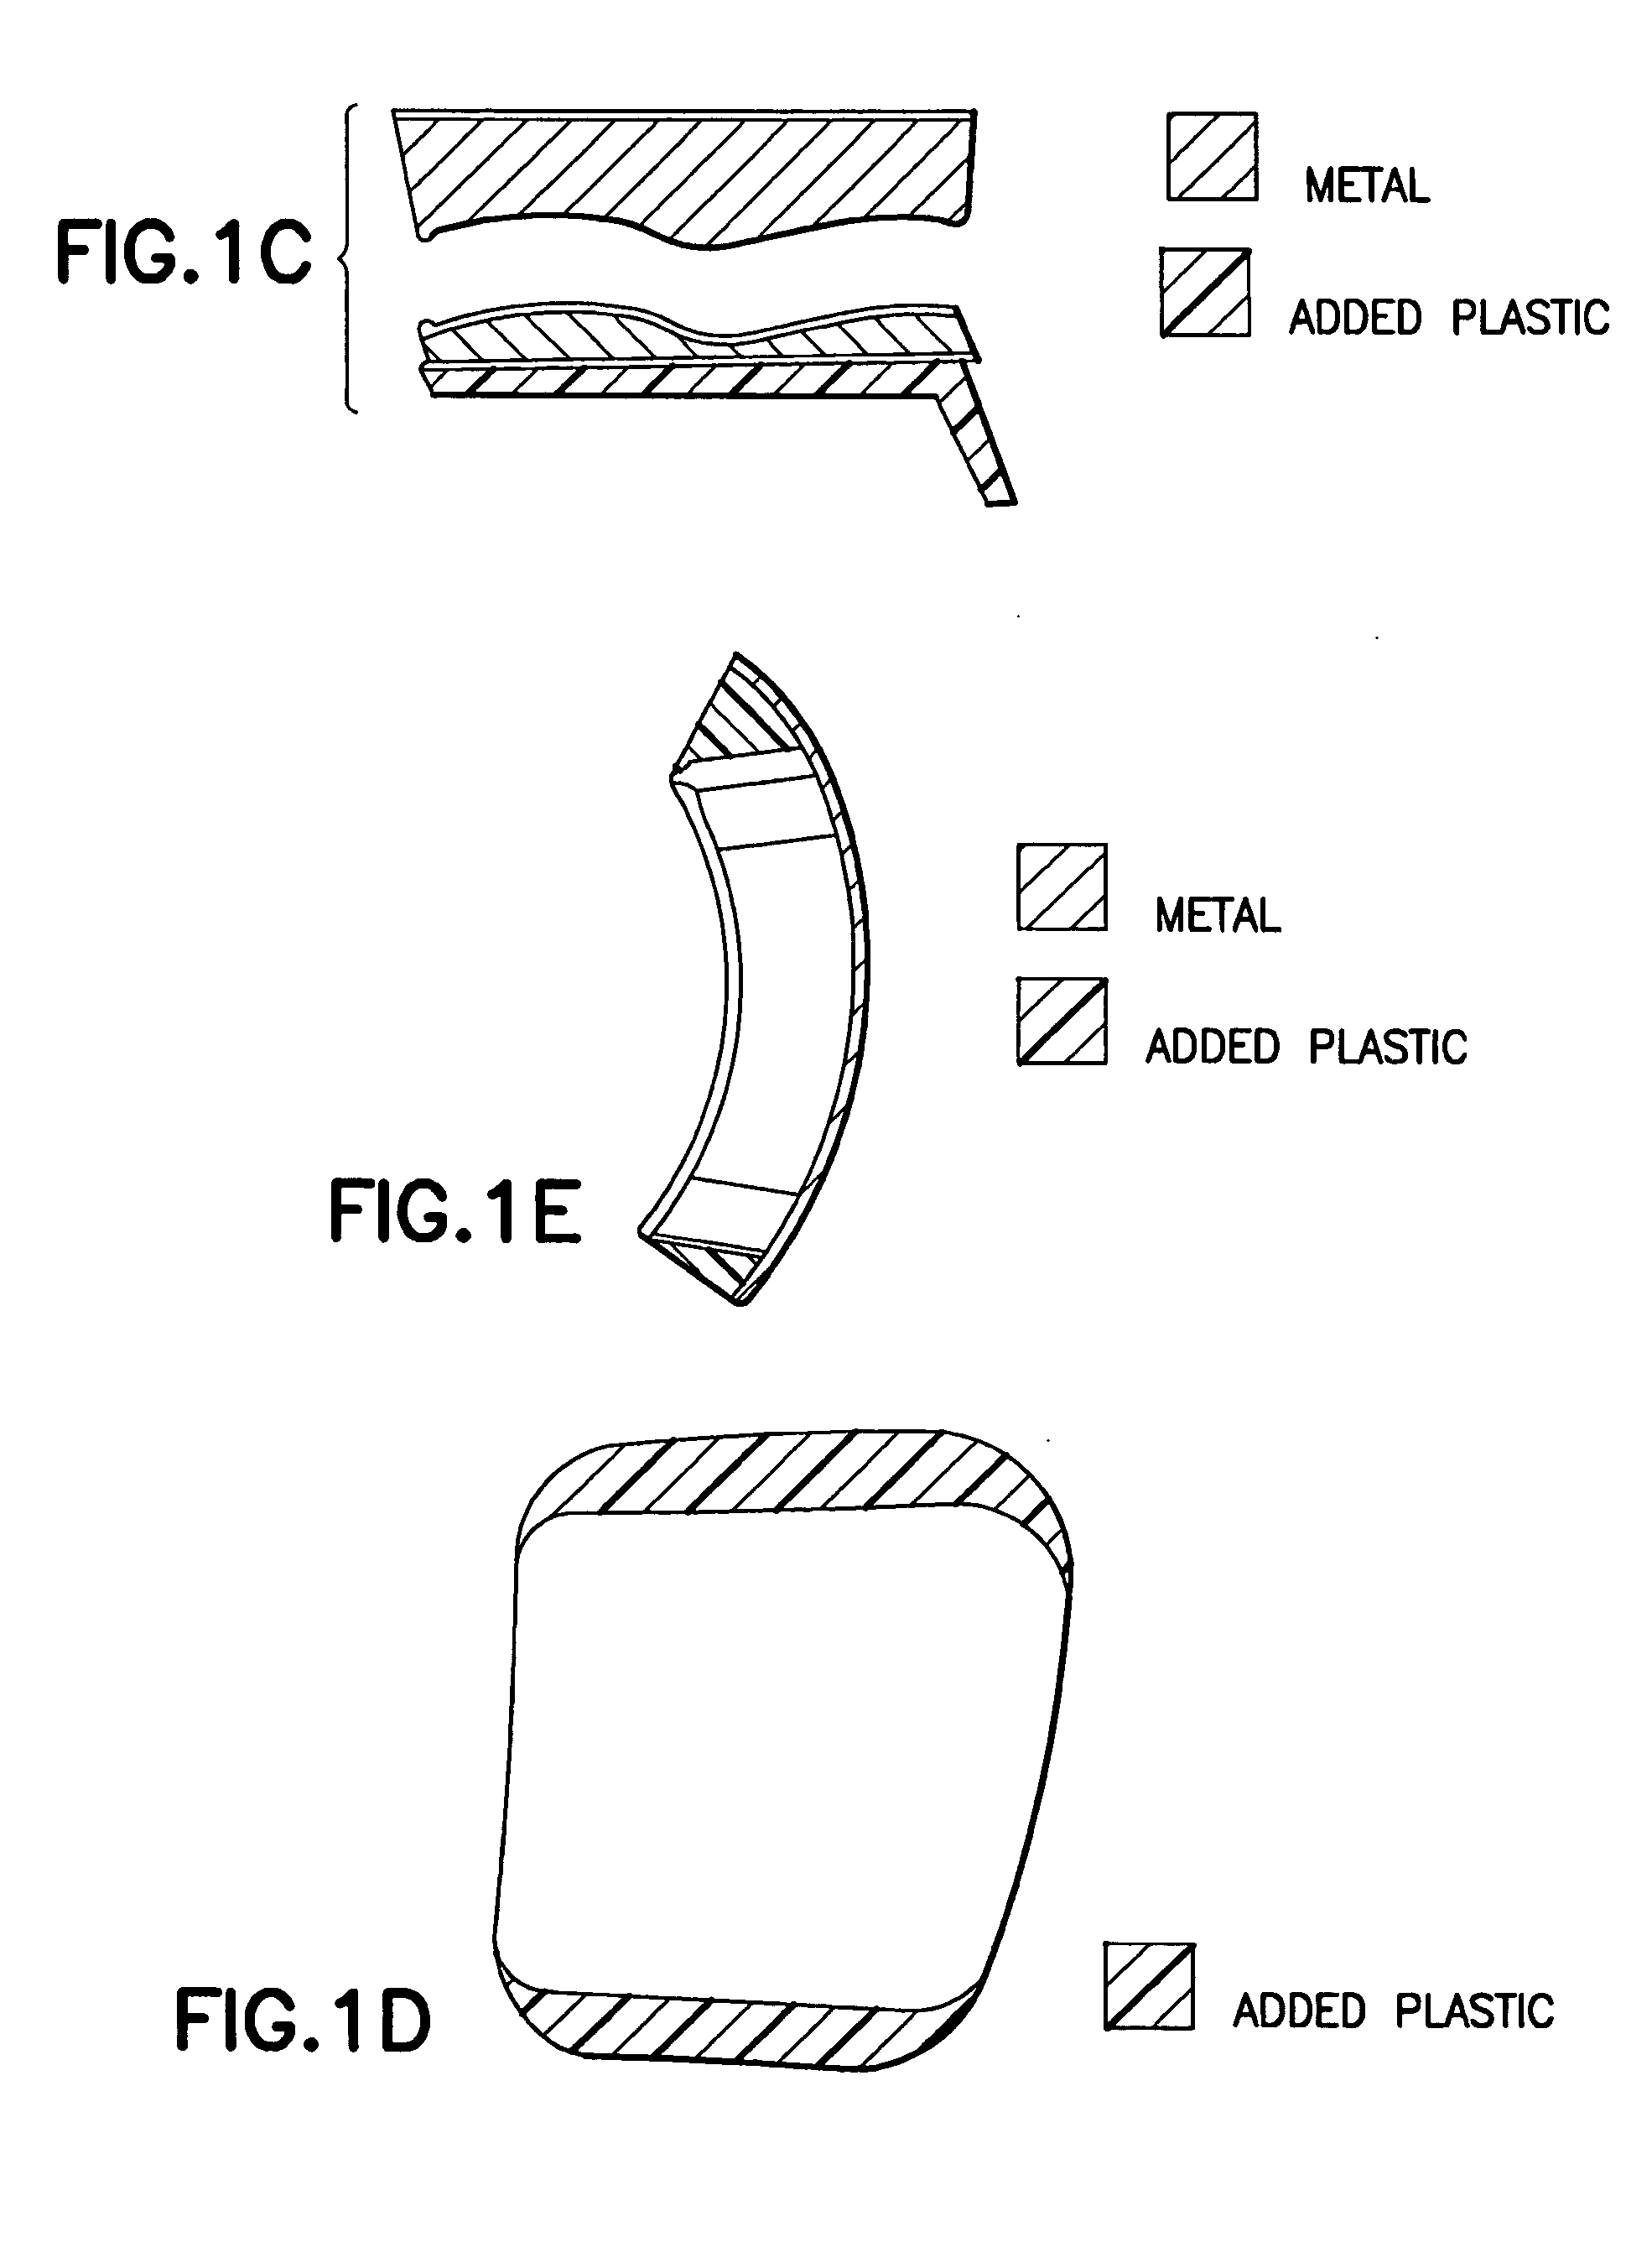 Ankle prosthesis and method for implanting ankle prosthesis